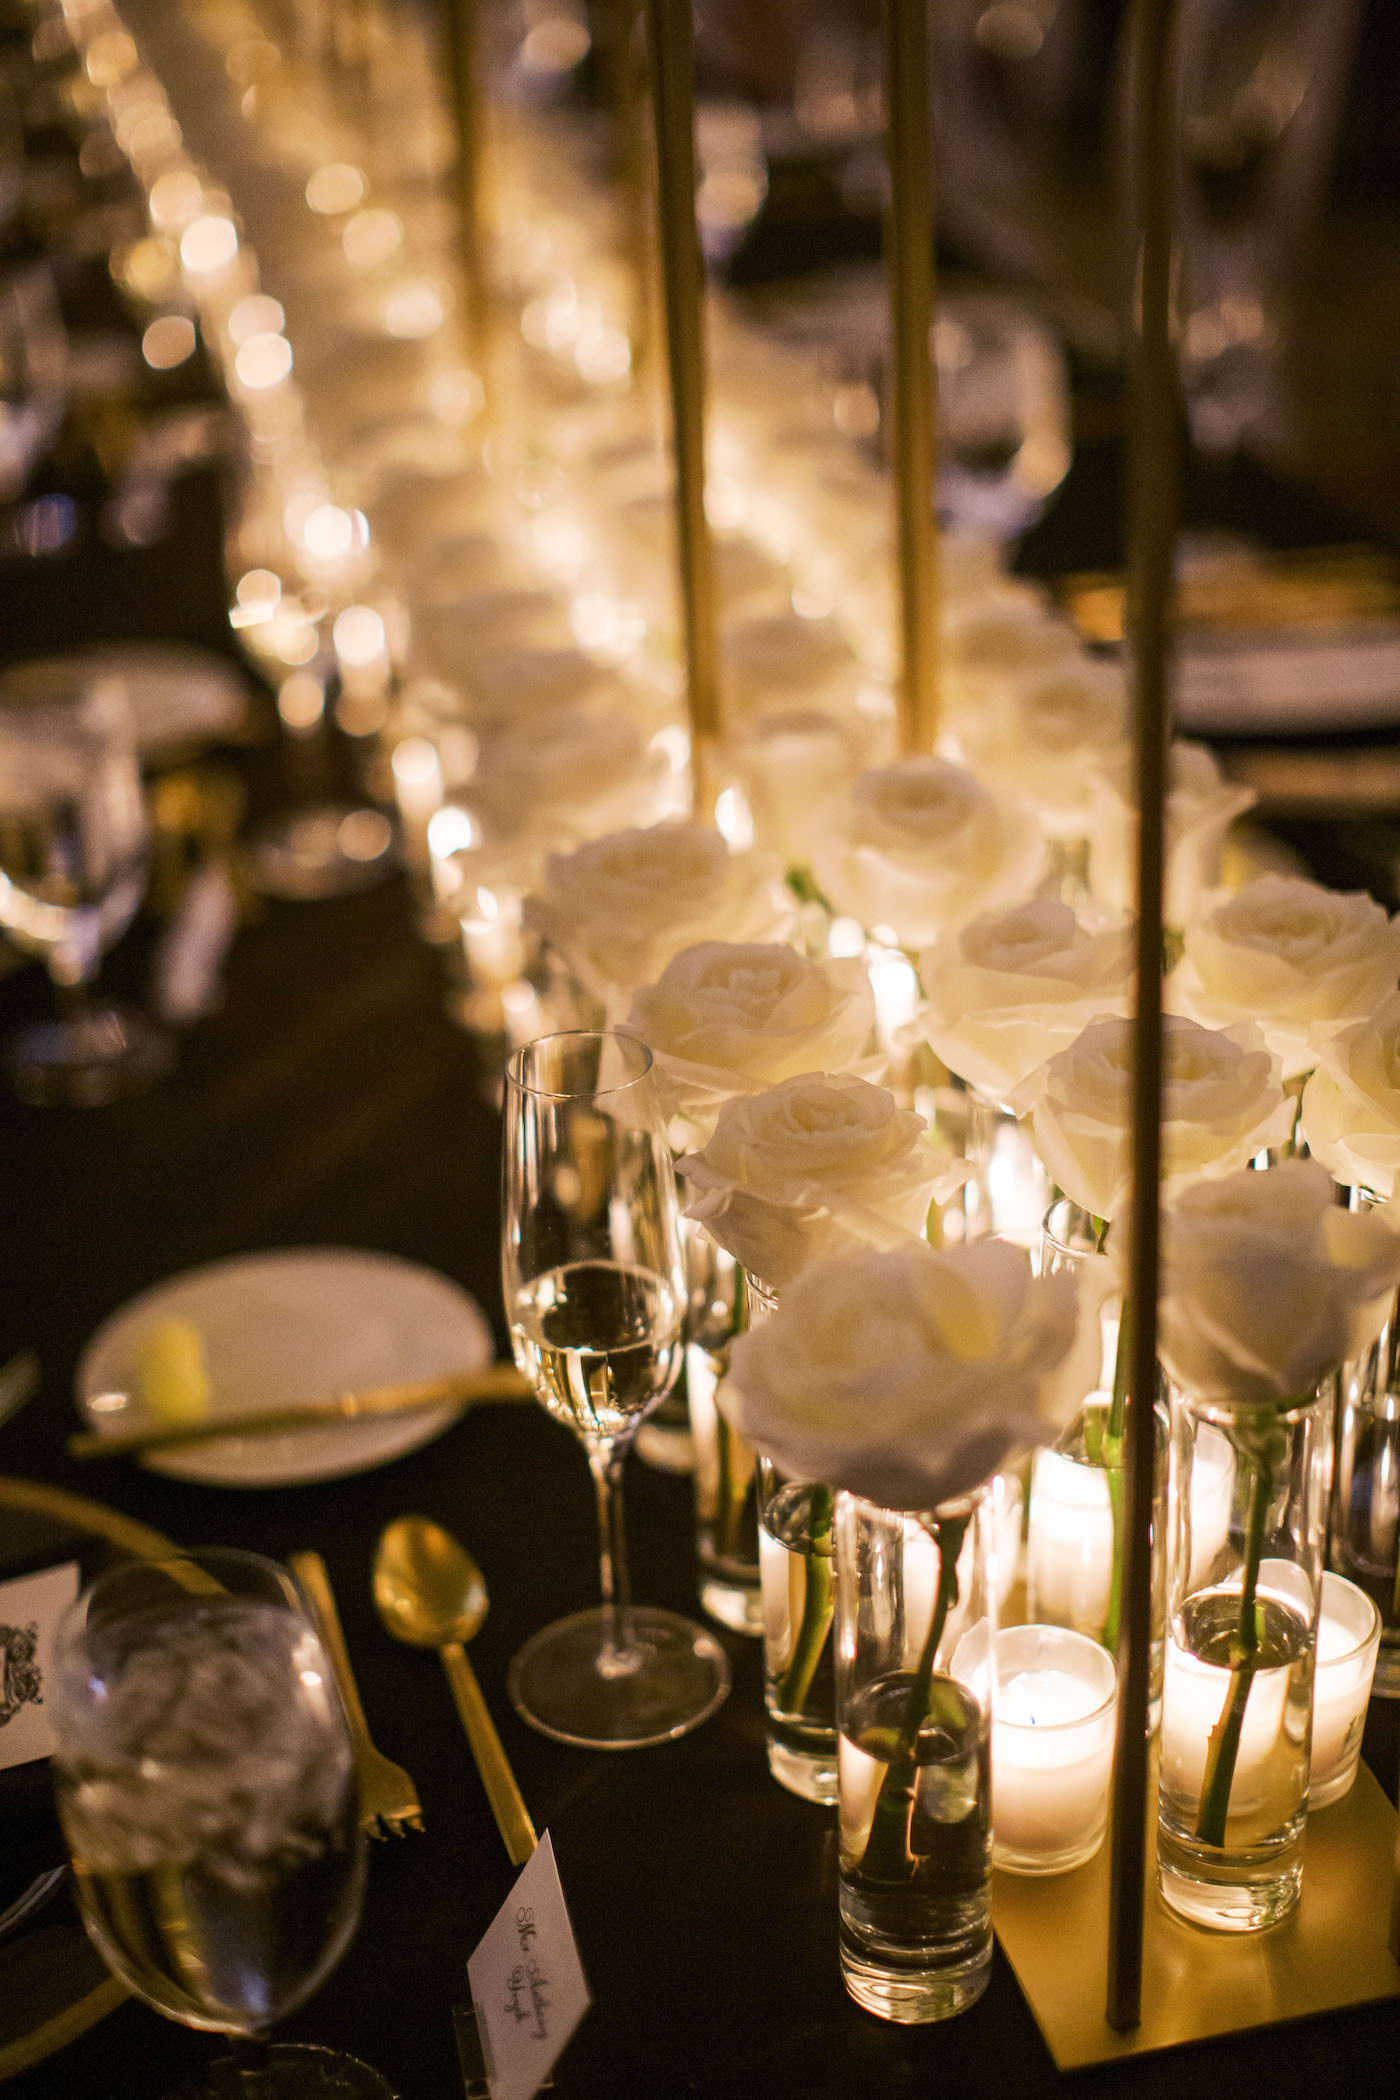 Classic White and Black Wedding Reception Inspiration | White Roses, Bud Vases, and Candlelight Centerpiece Ideas | Tampa Bay Planner Parties A La Carte